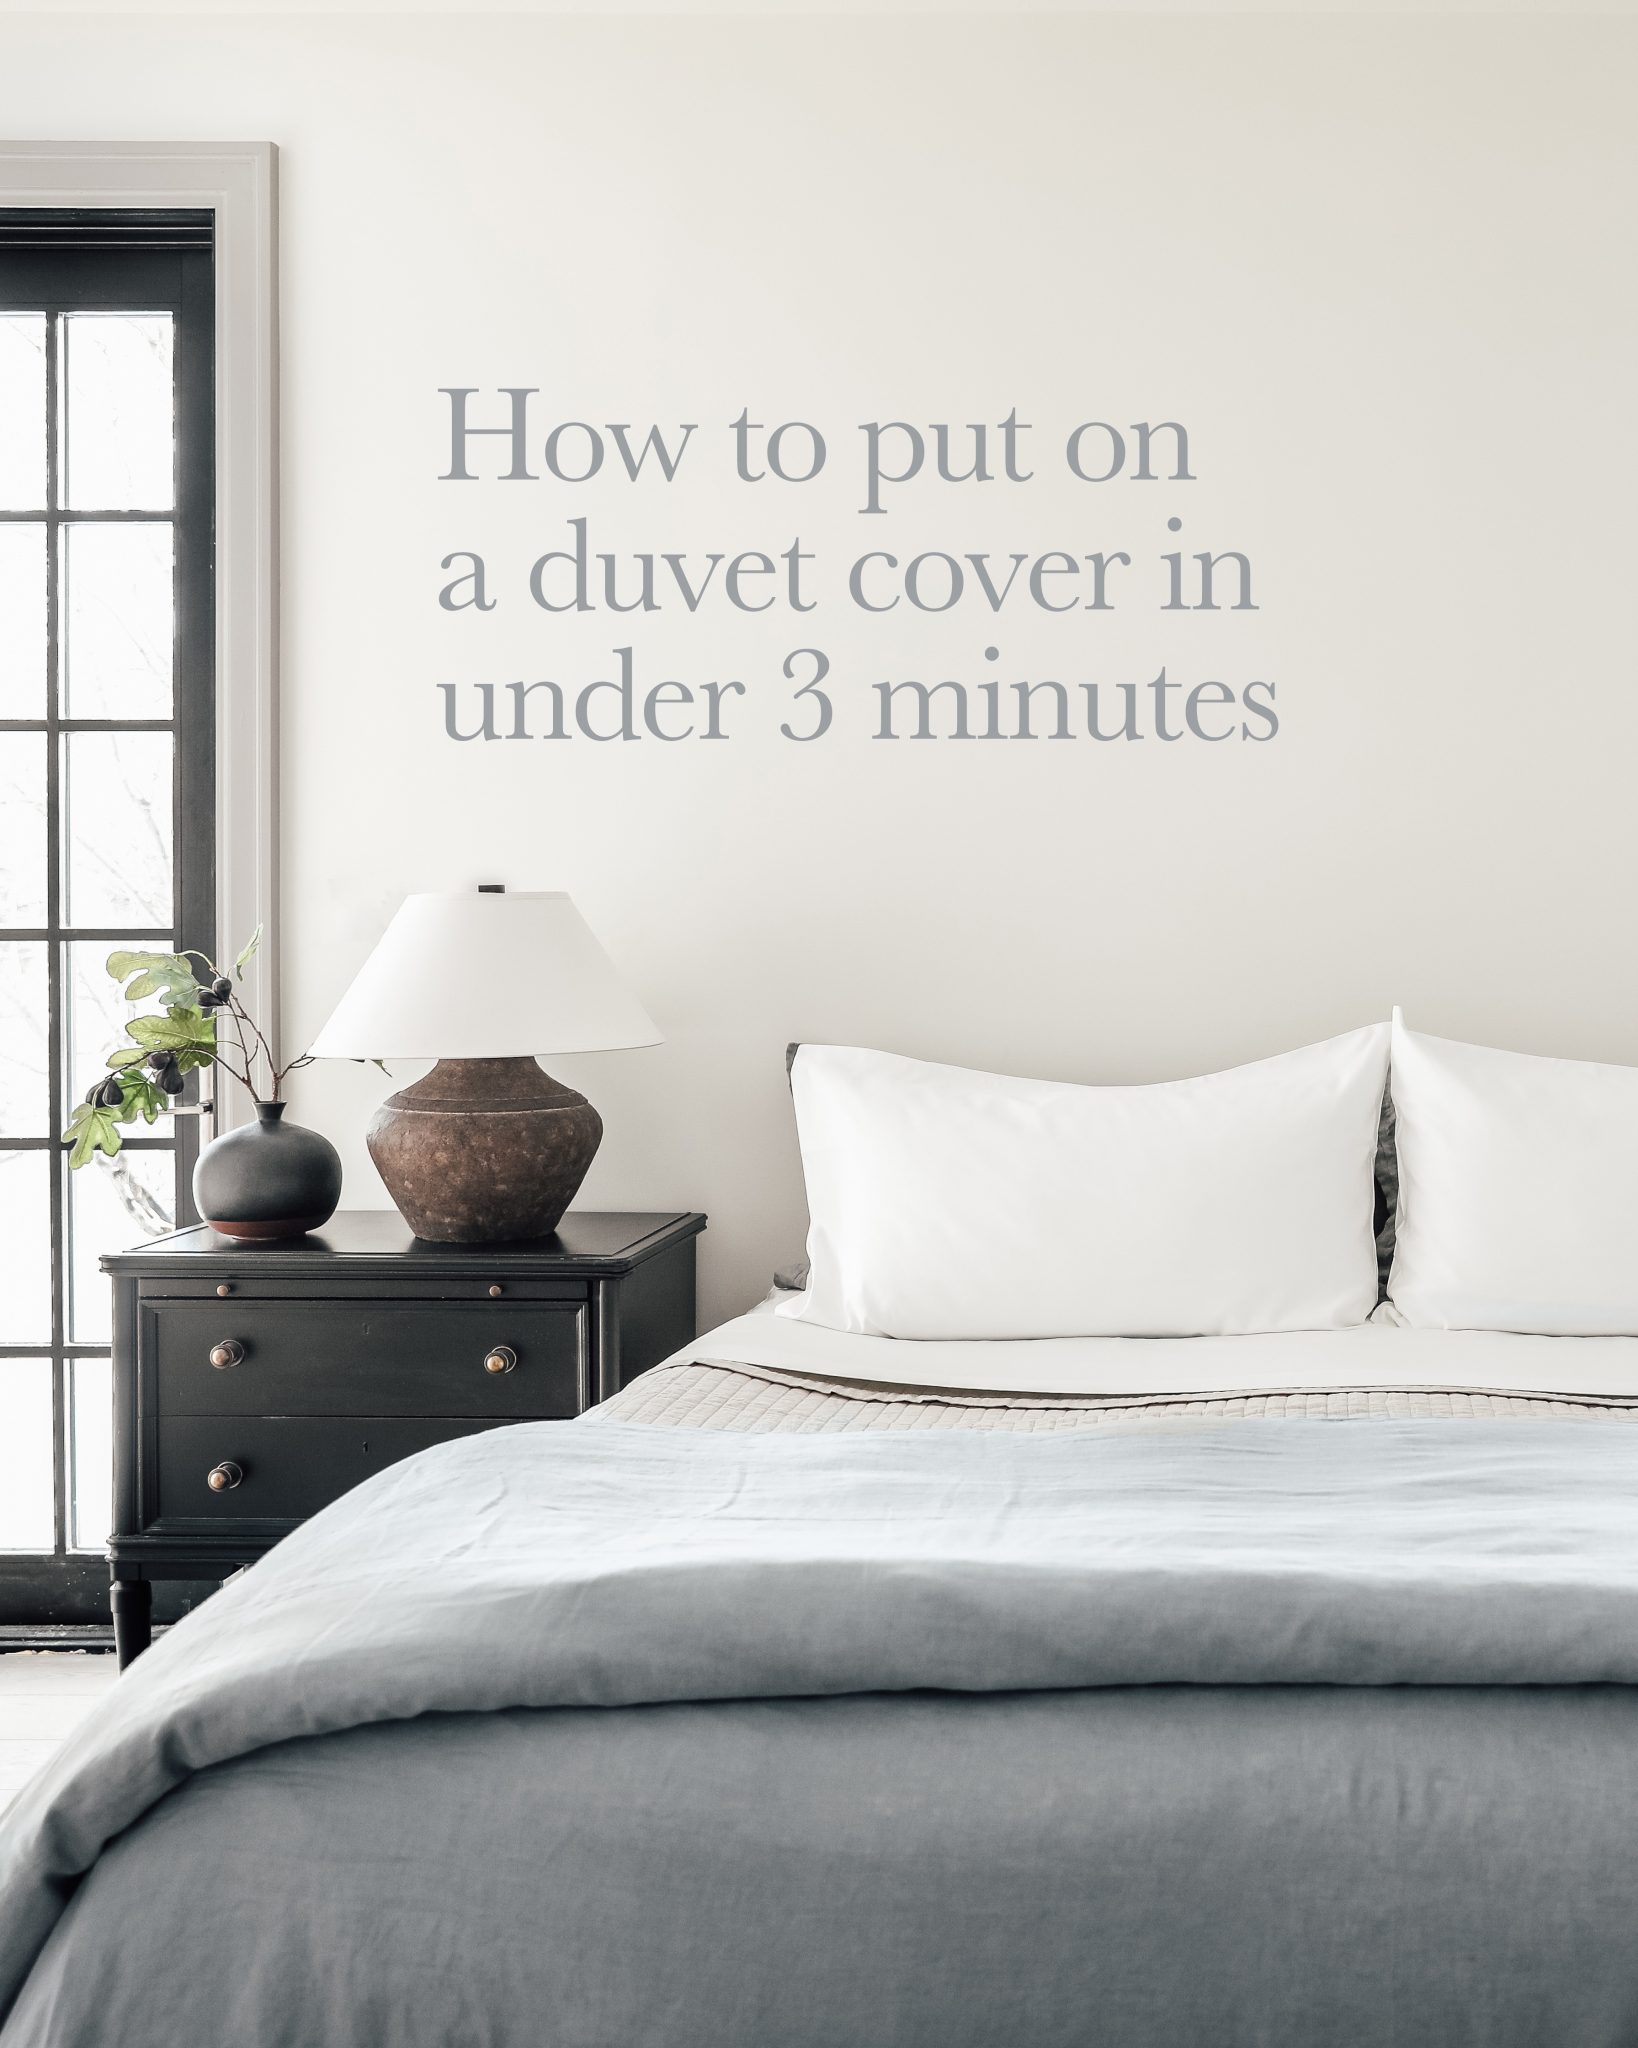 How To Put On A Duvet Cover In Under 3, How To Make A Duvet Cover With Zipper